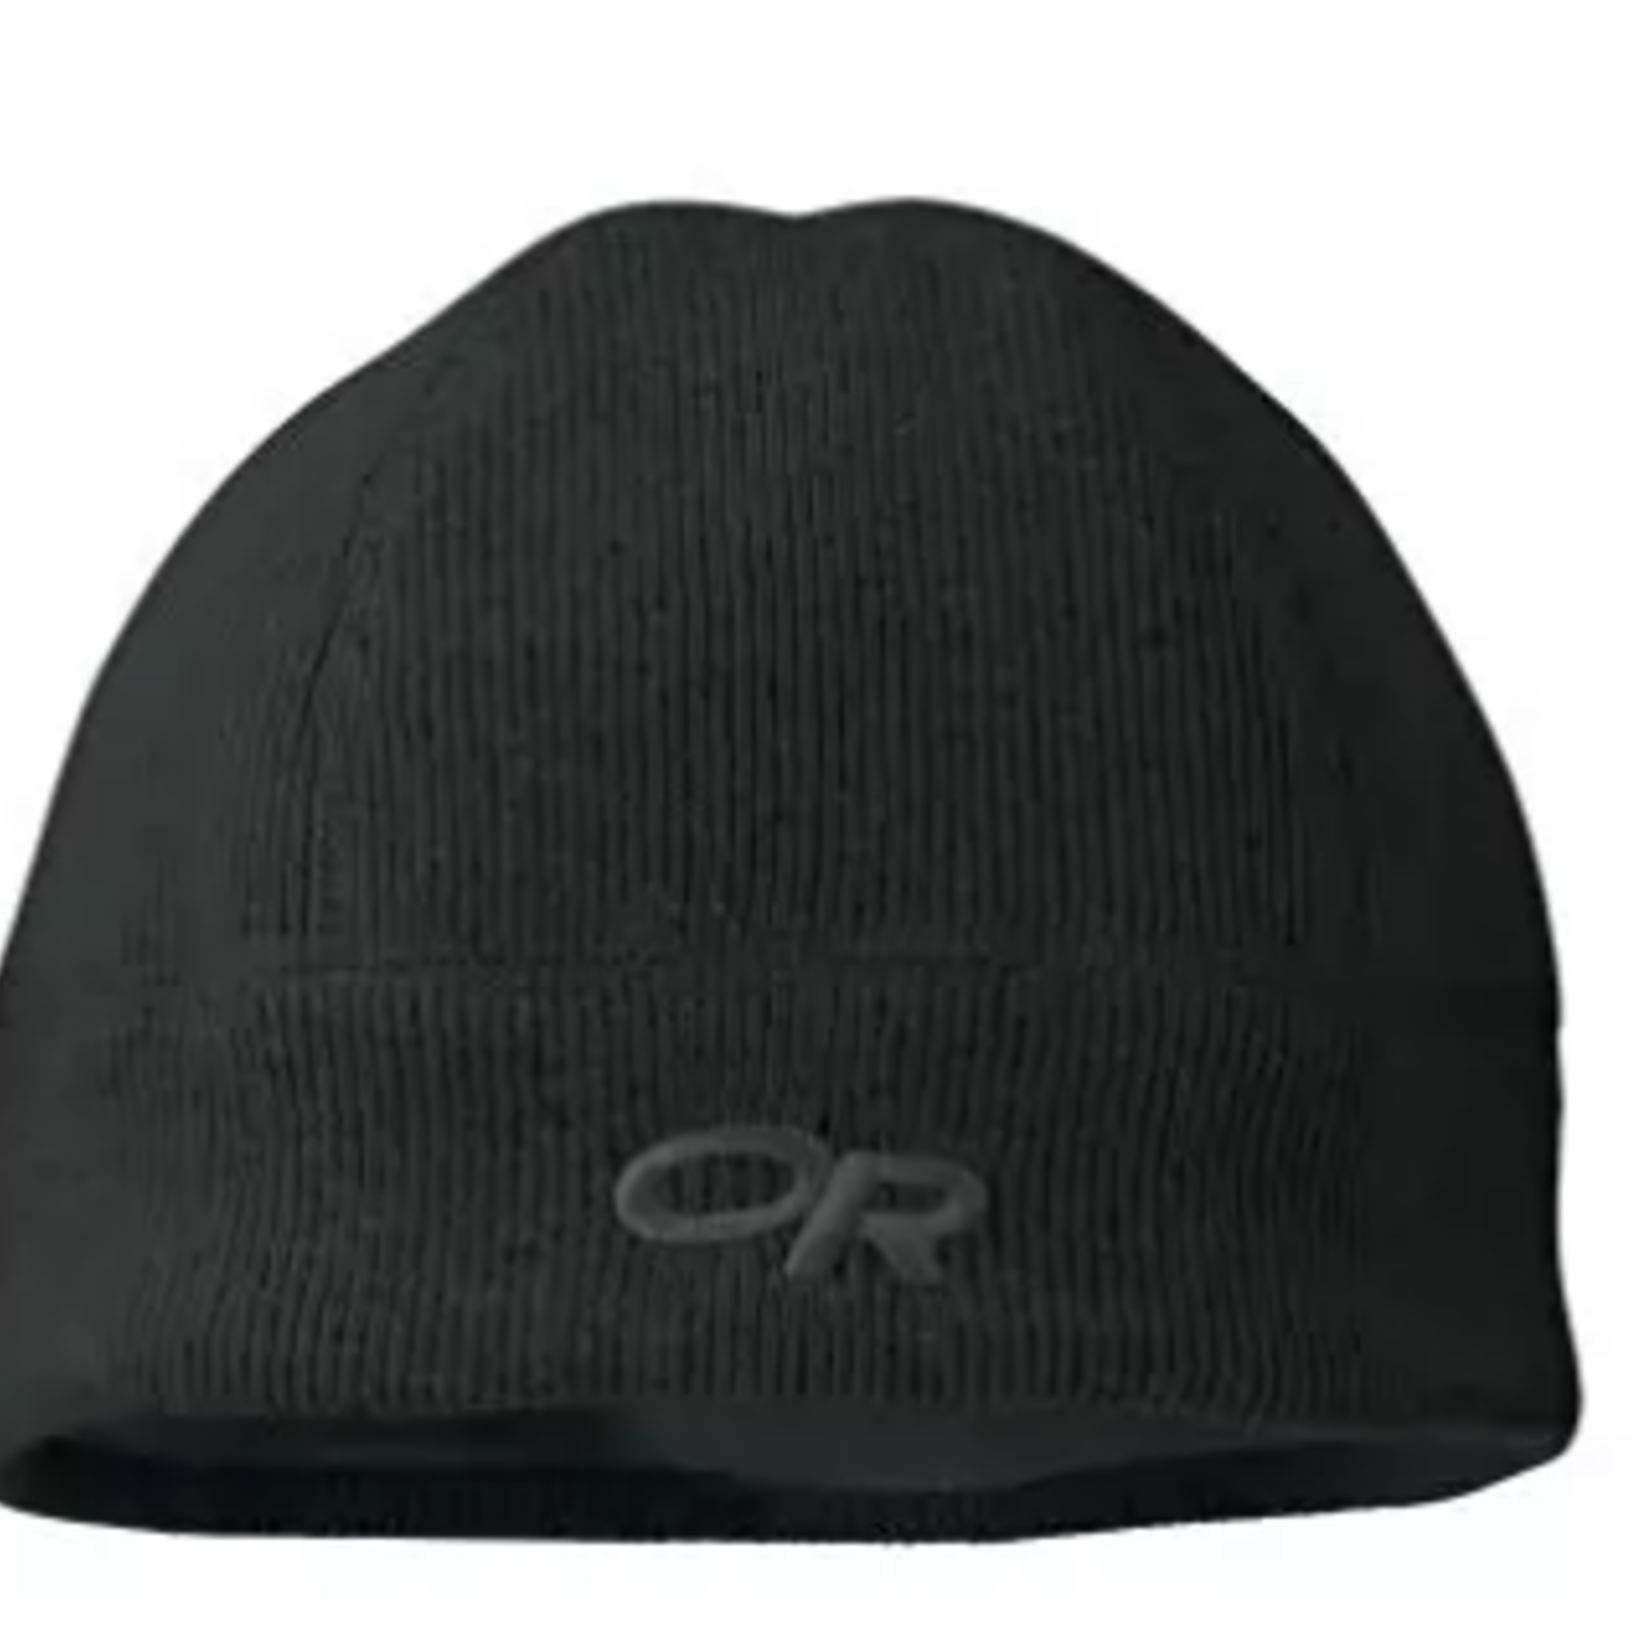 Outdoor Research Outdoor Research Flurry Beanie